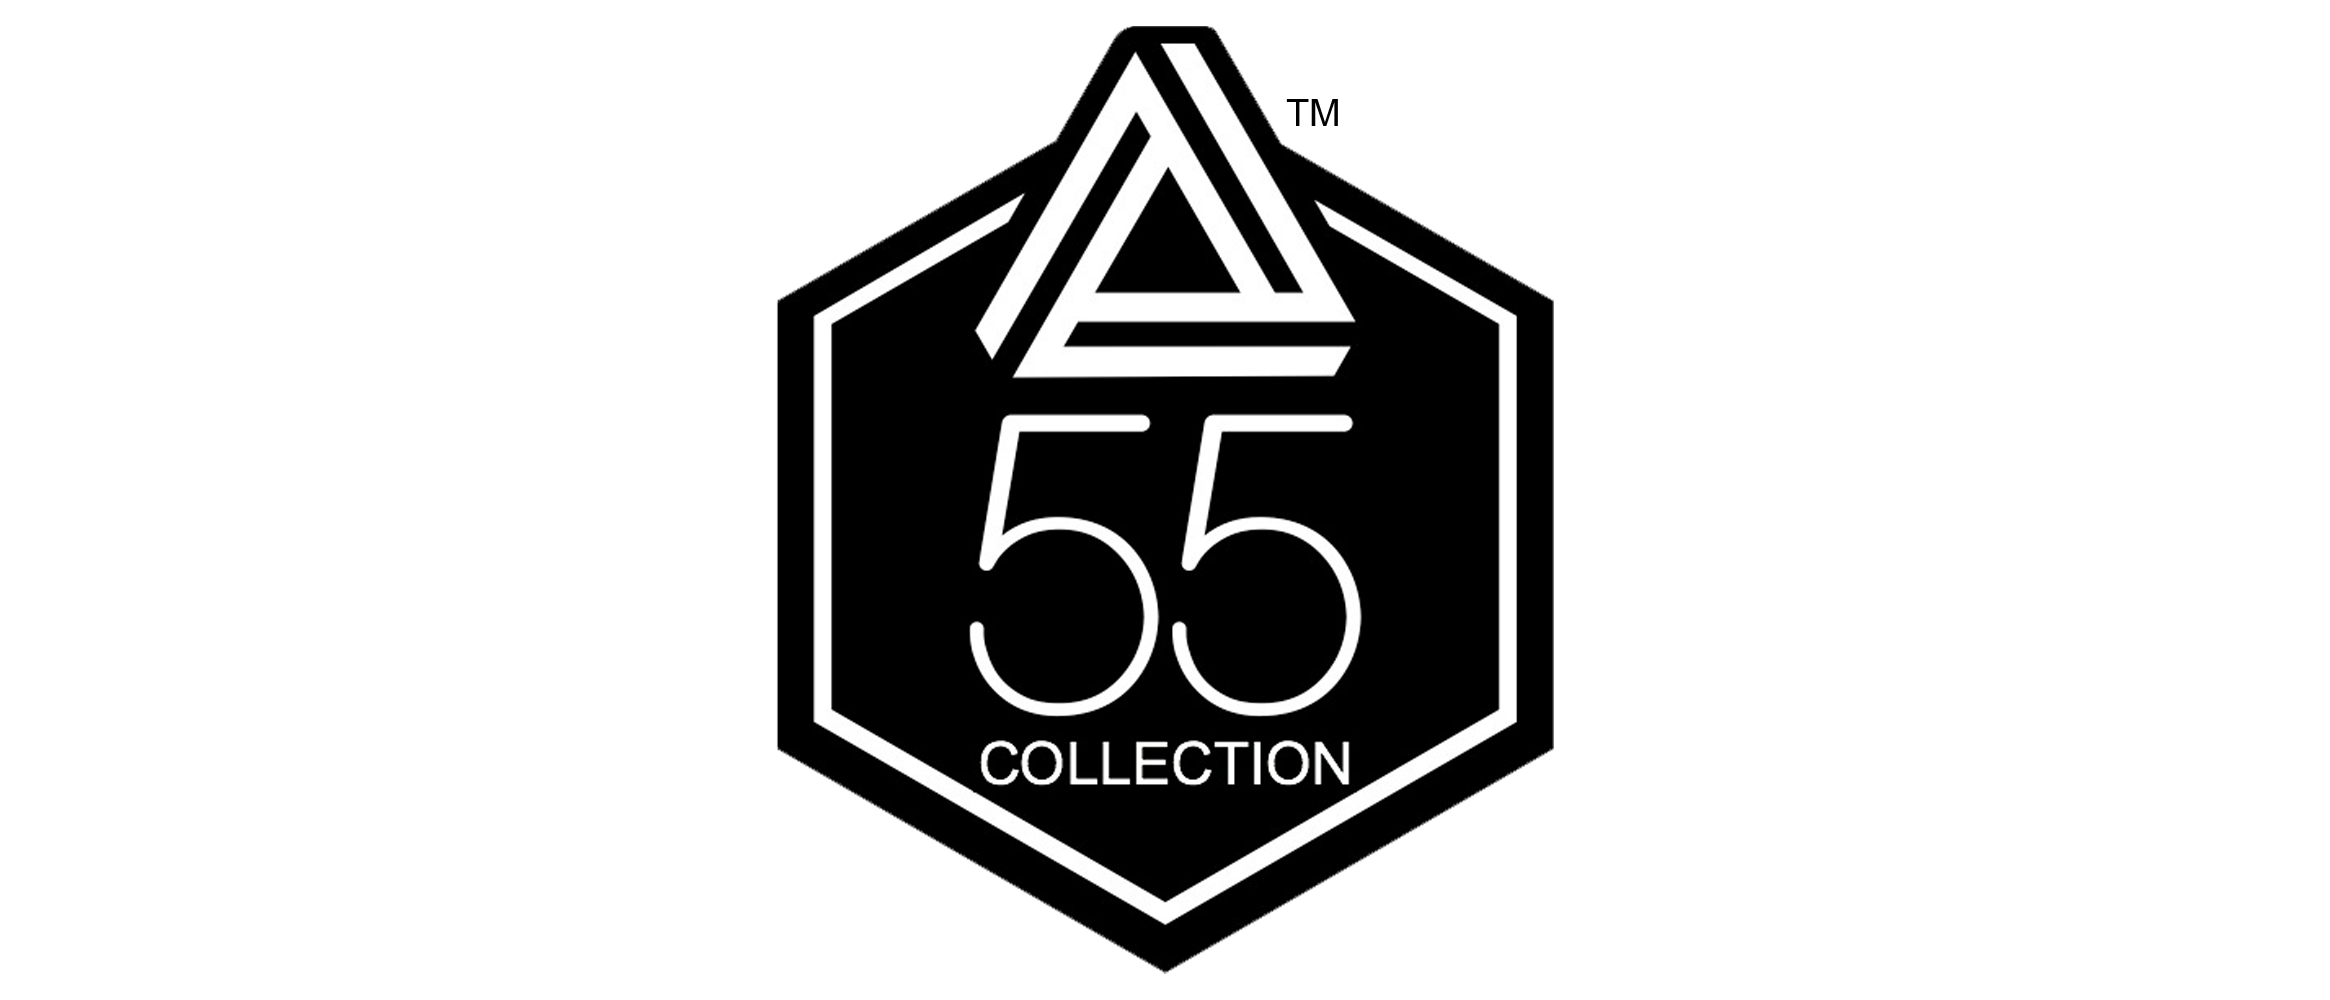 55collection.com